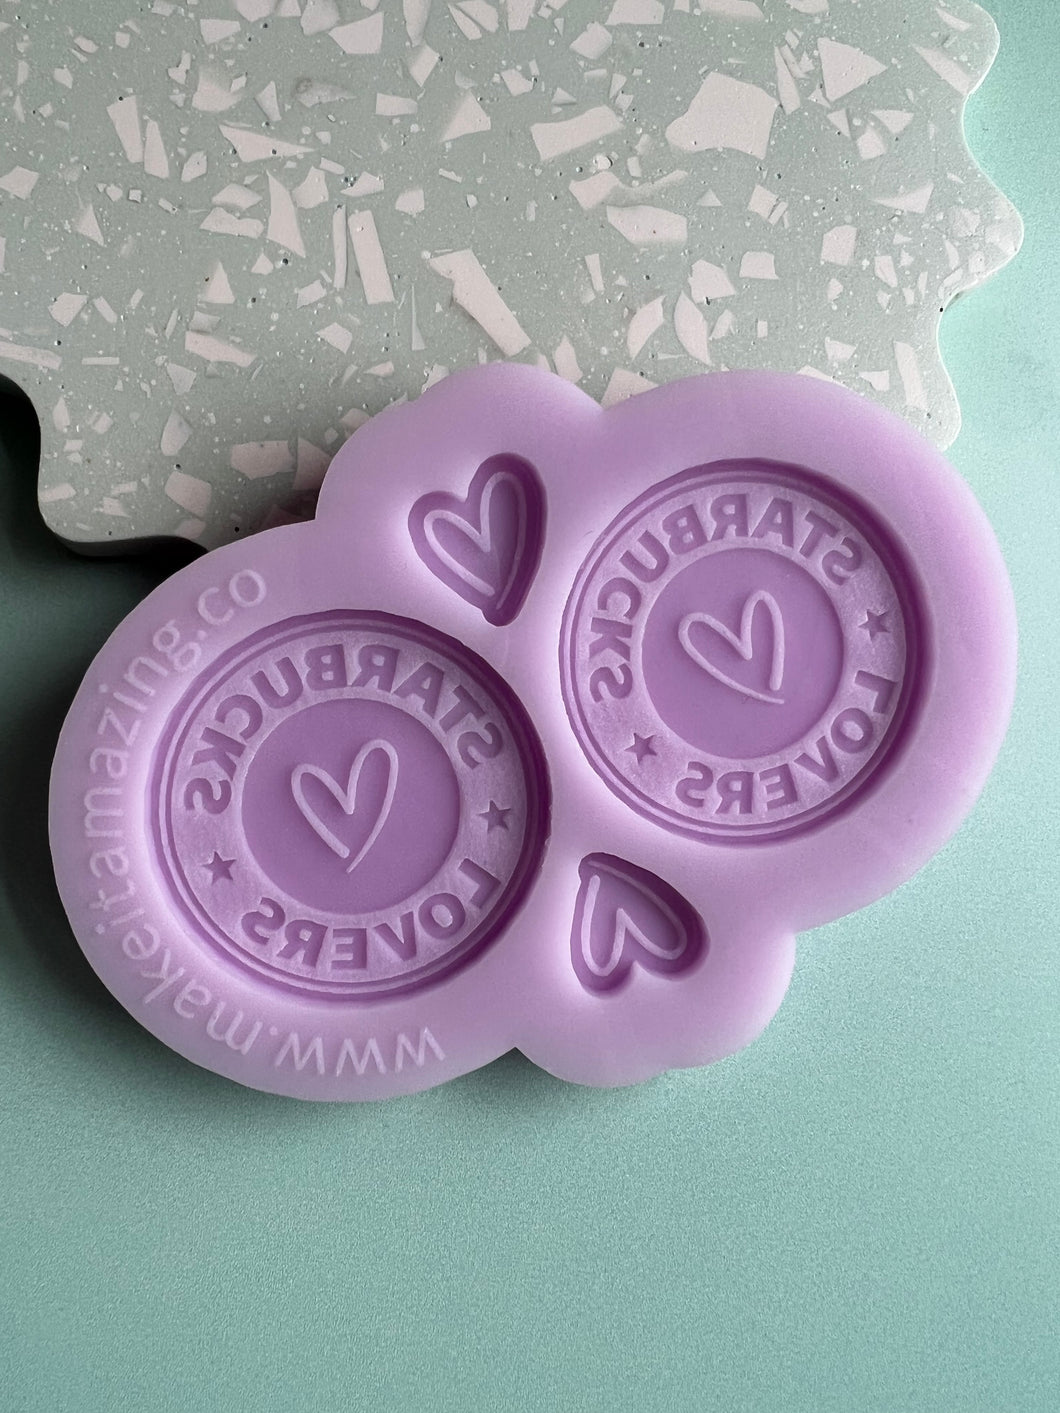 Starbucks lovers silicone mould